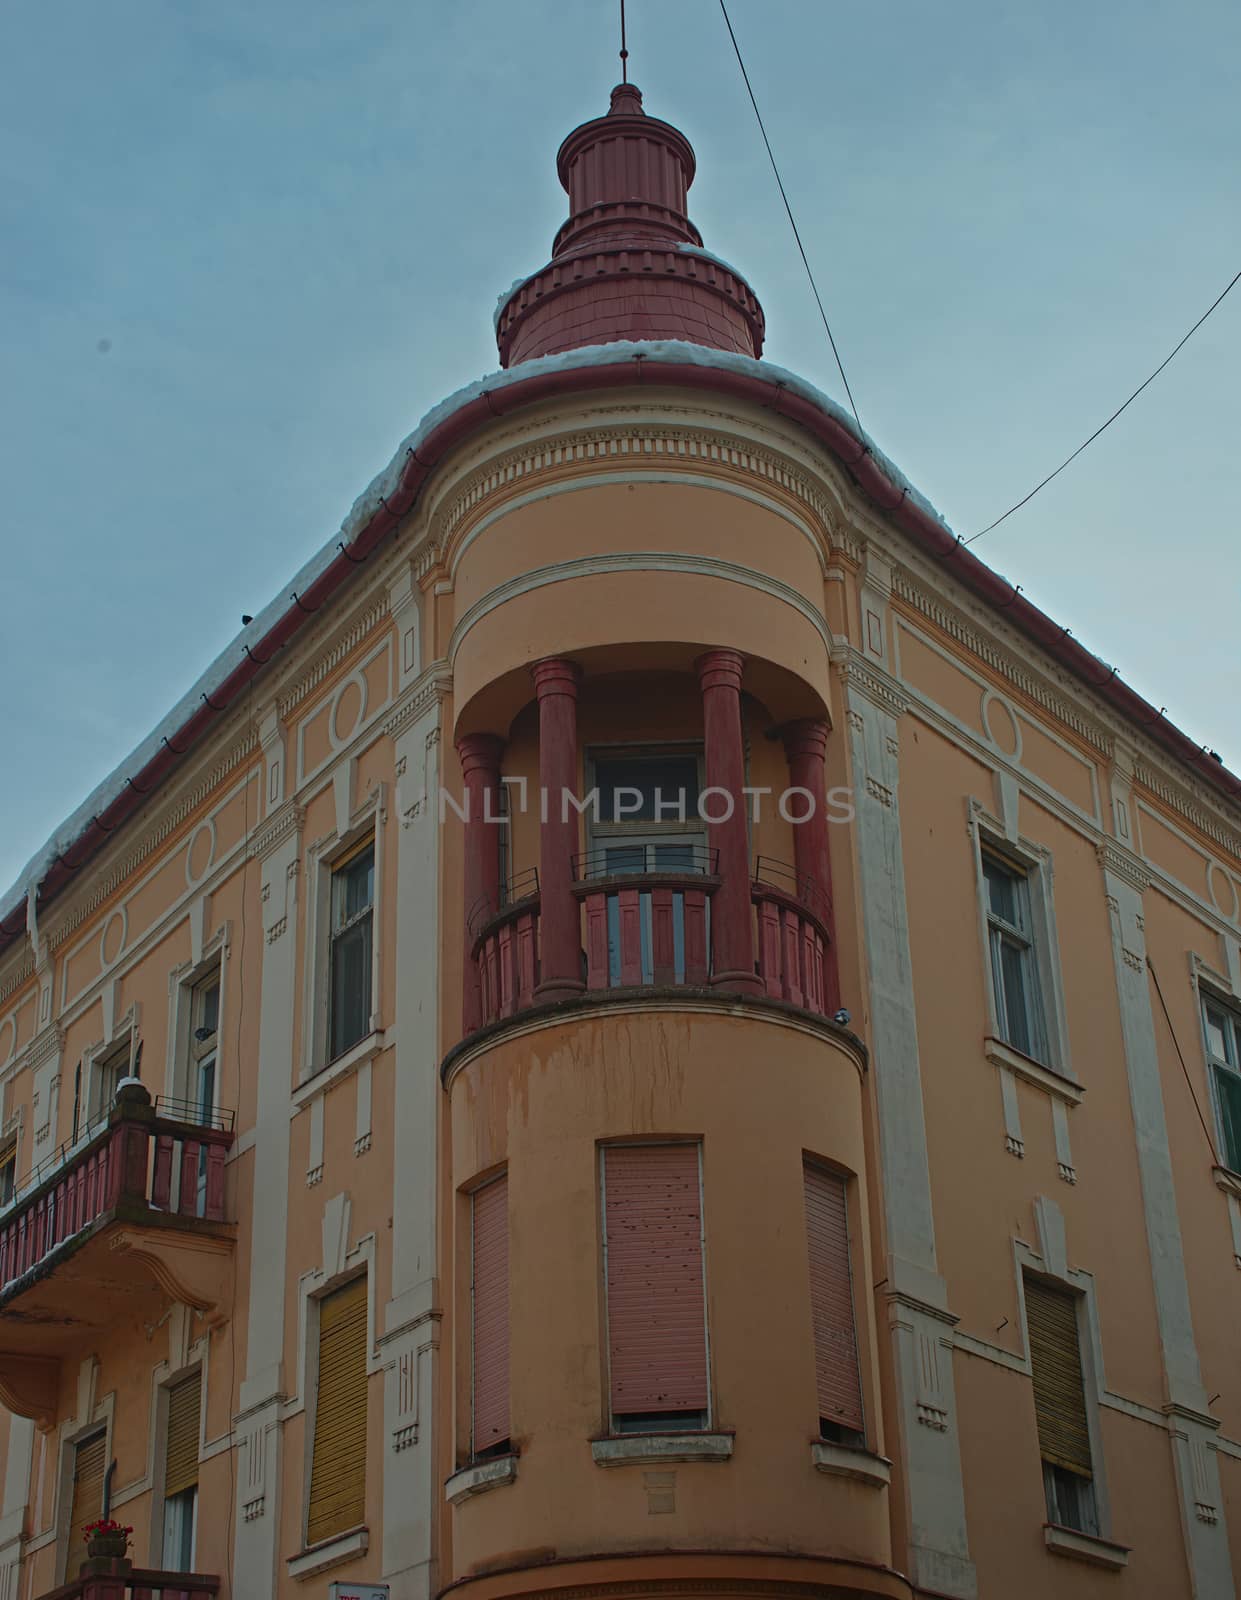 Top corner of an old style building with an orange facade by sheriffkule